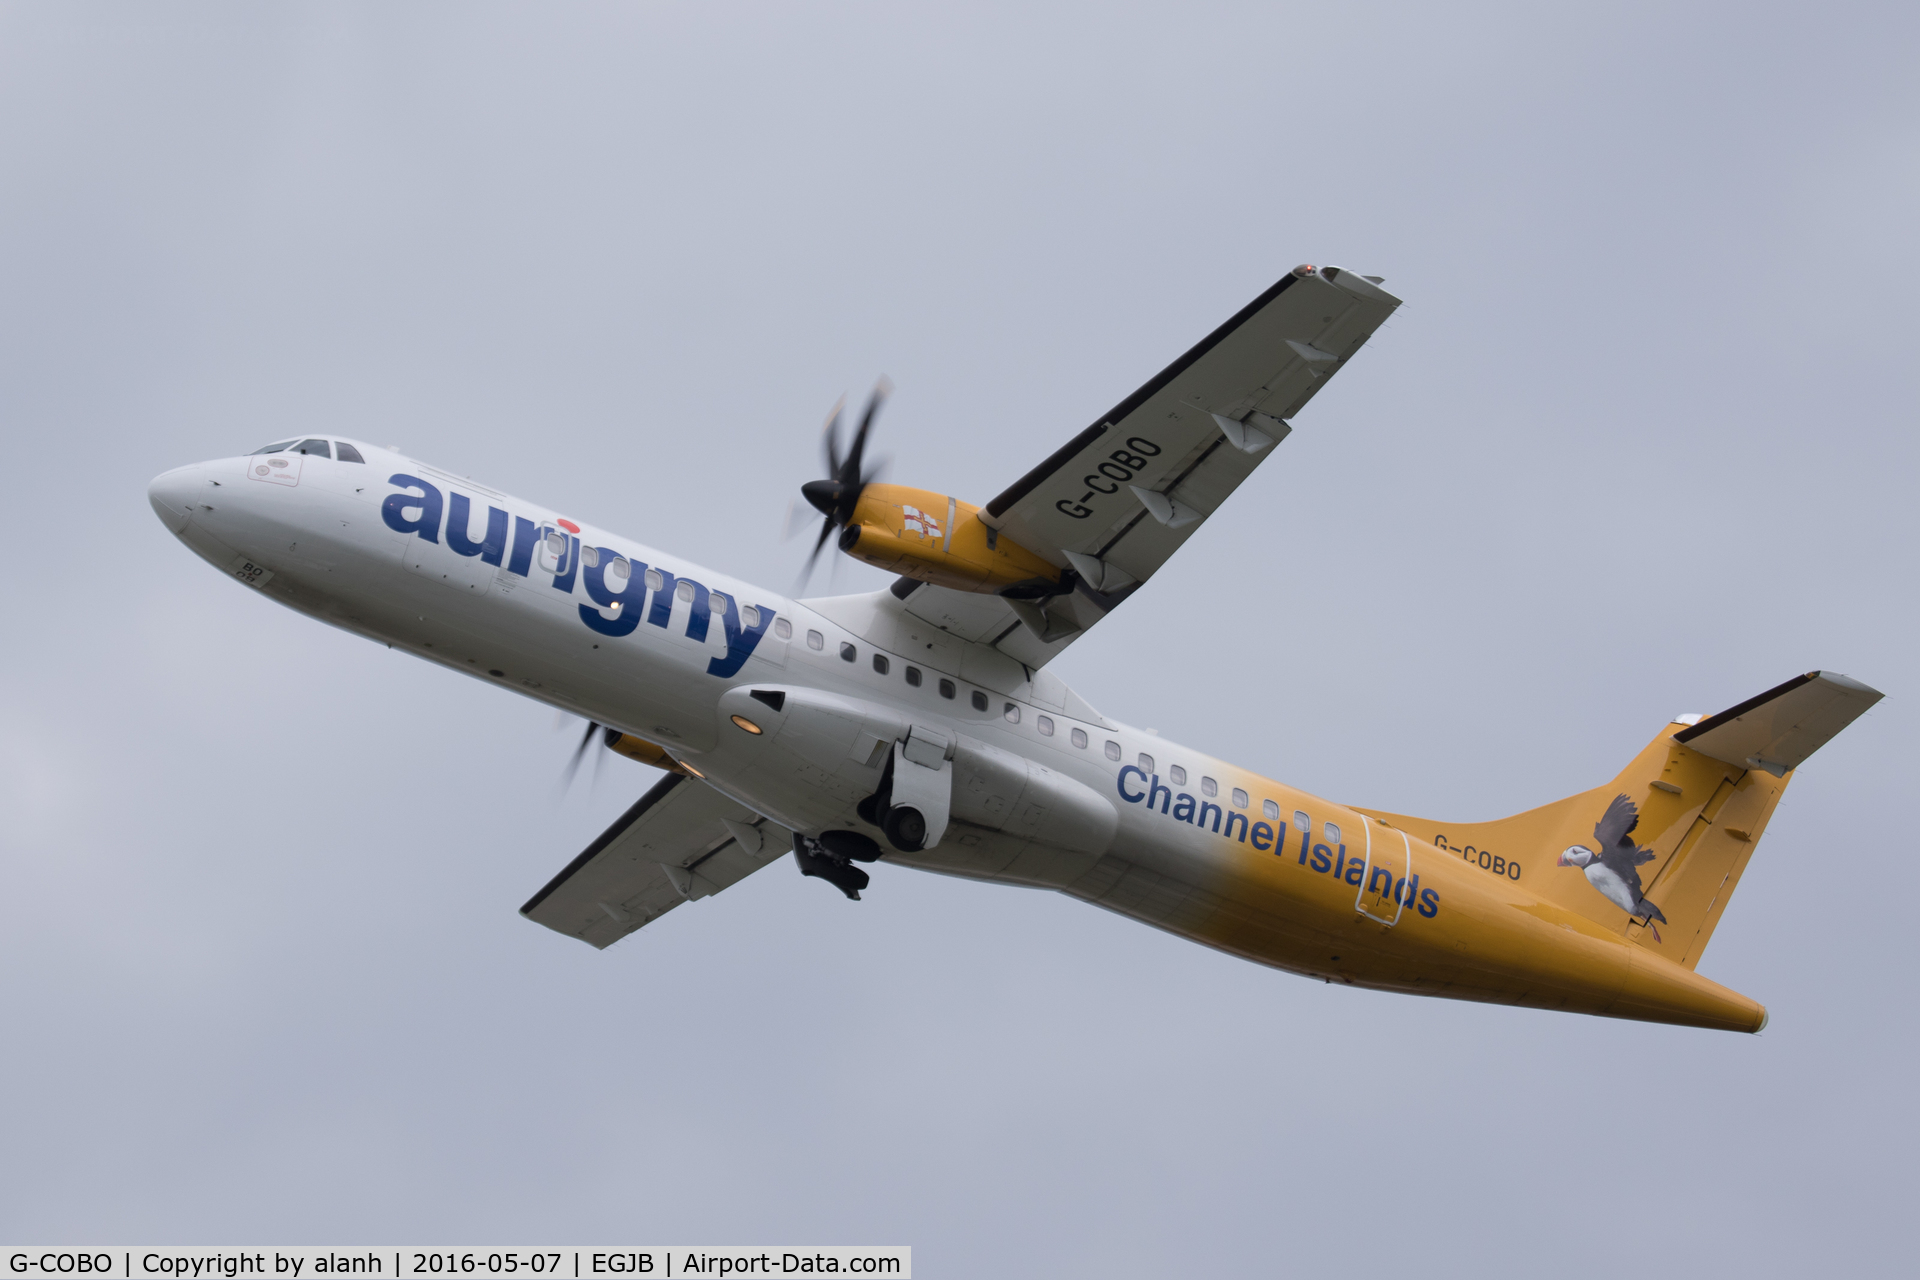 G-COBO, 2008 ATR 72-212A C/N 852, Departing home base Guernsey for Manchester